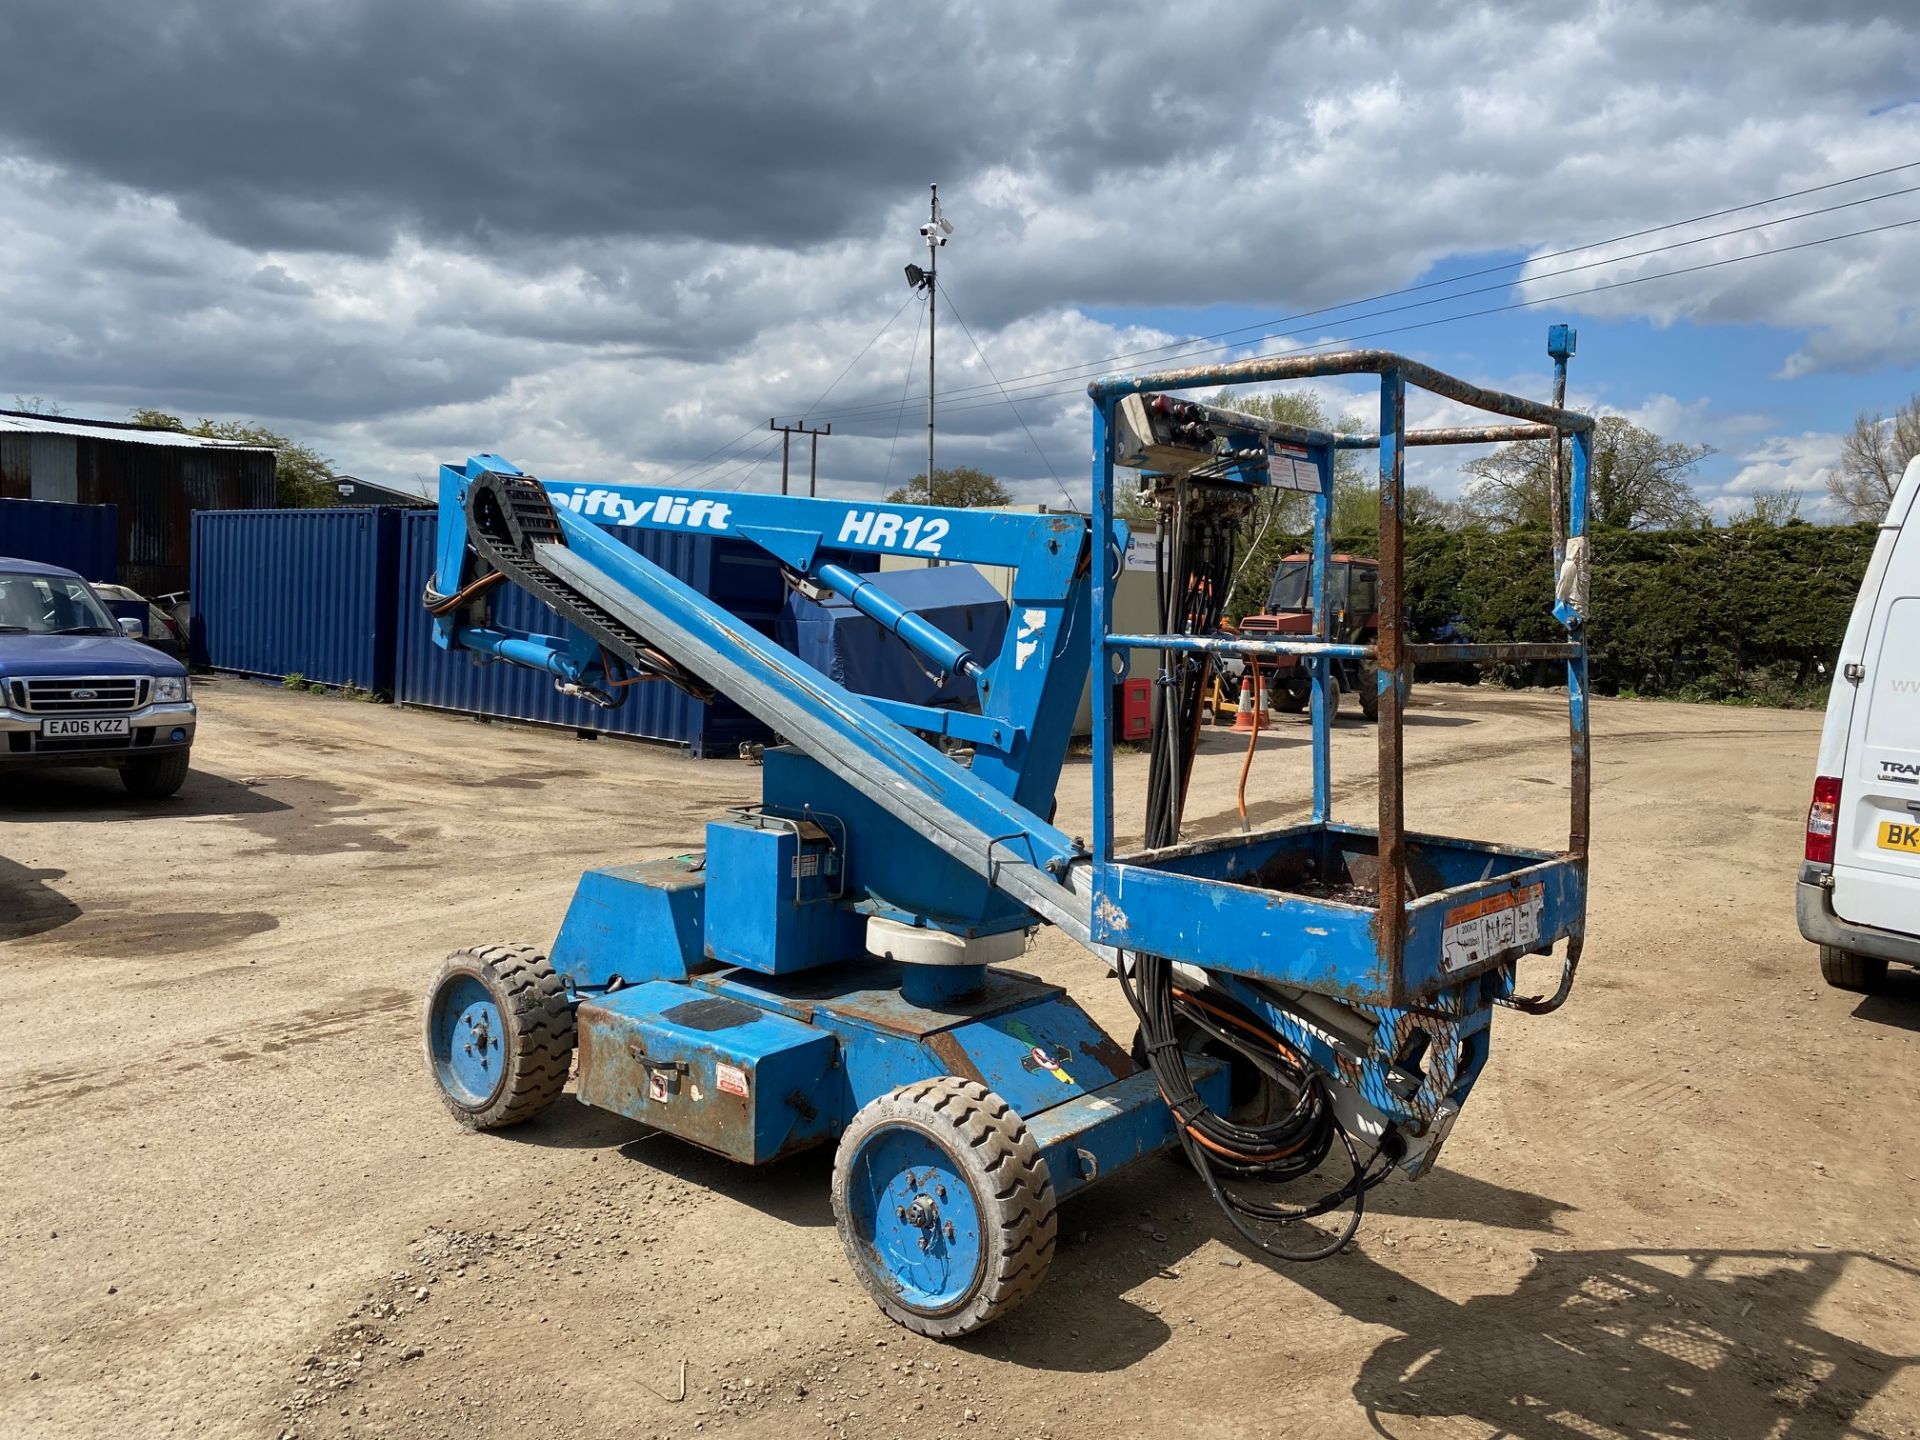 2001 NIFTYLIFT HR12 CHERRY PICKER, SHOWING 175 HOURS, DIESEL AND BATTERY OPERATED *PLUS VAT* - Image 3 of 6